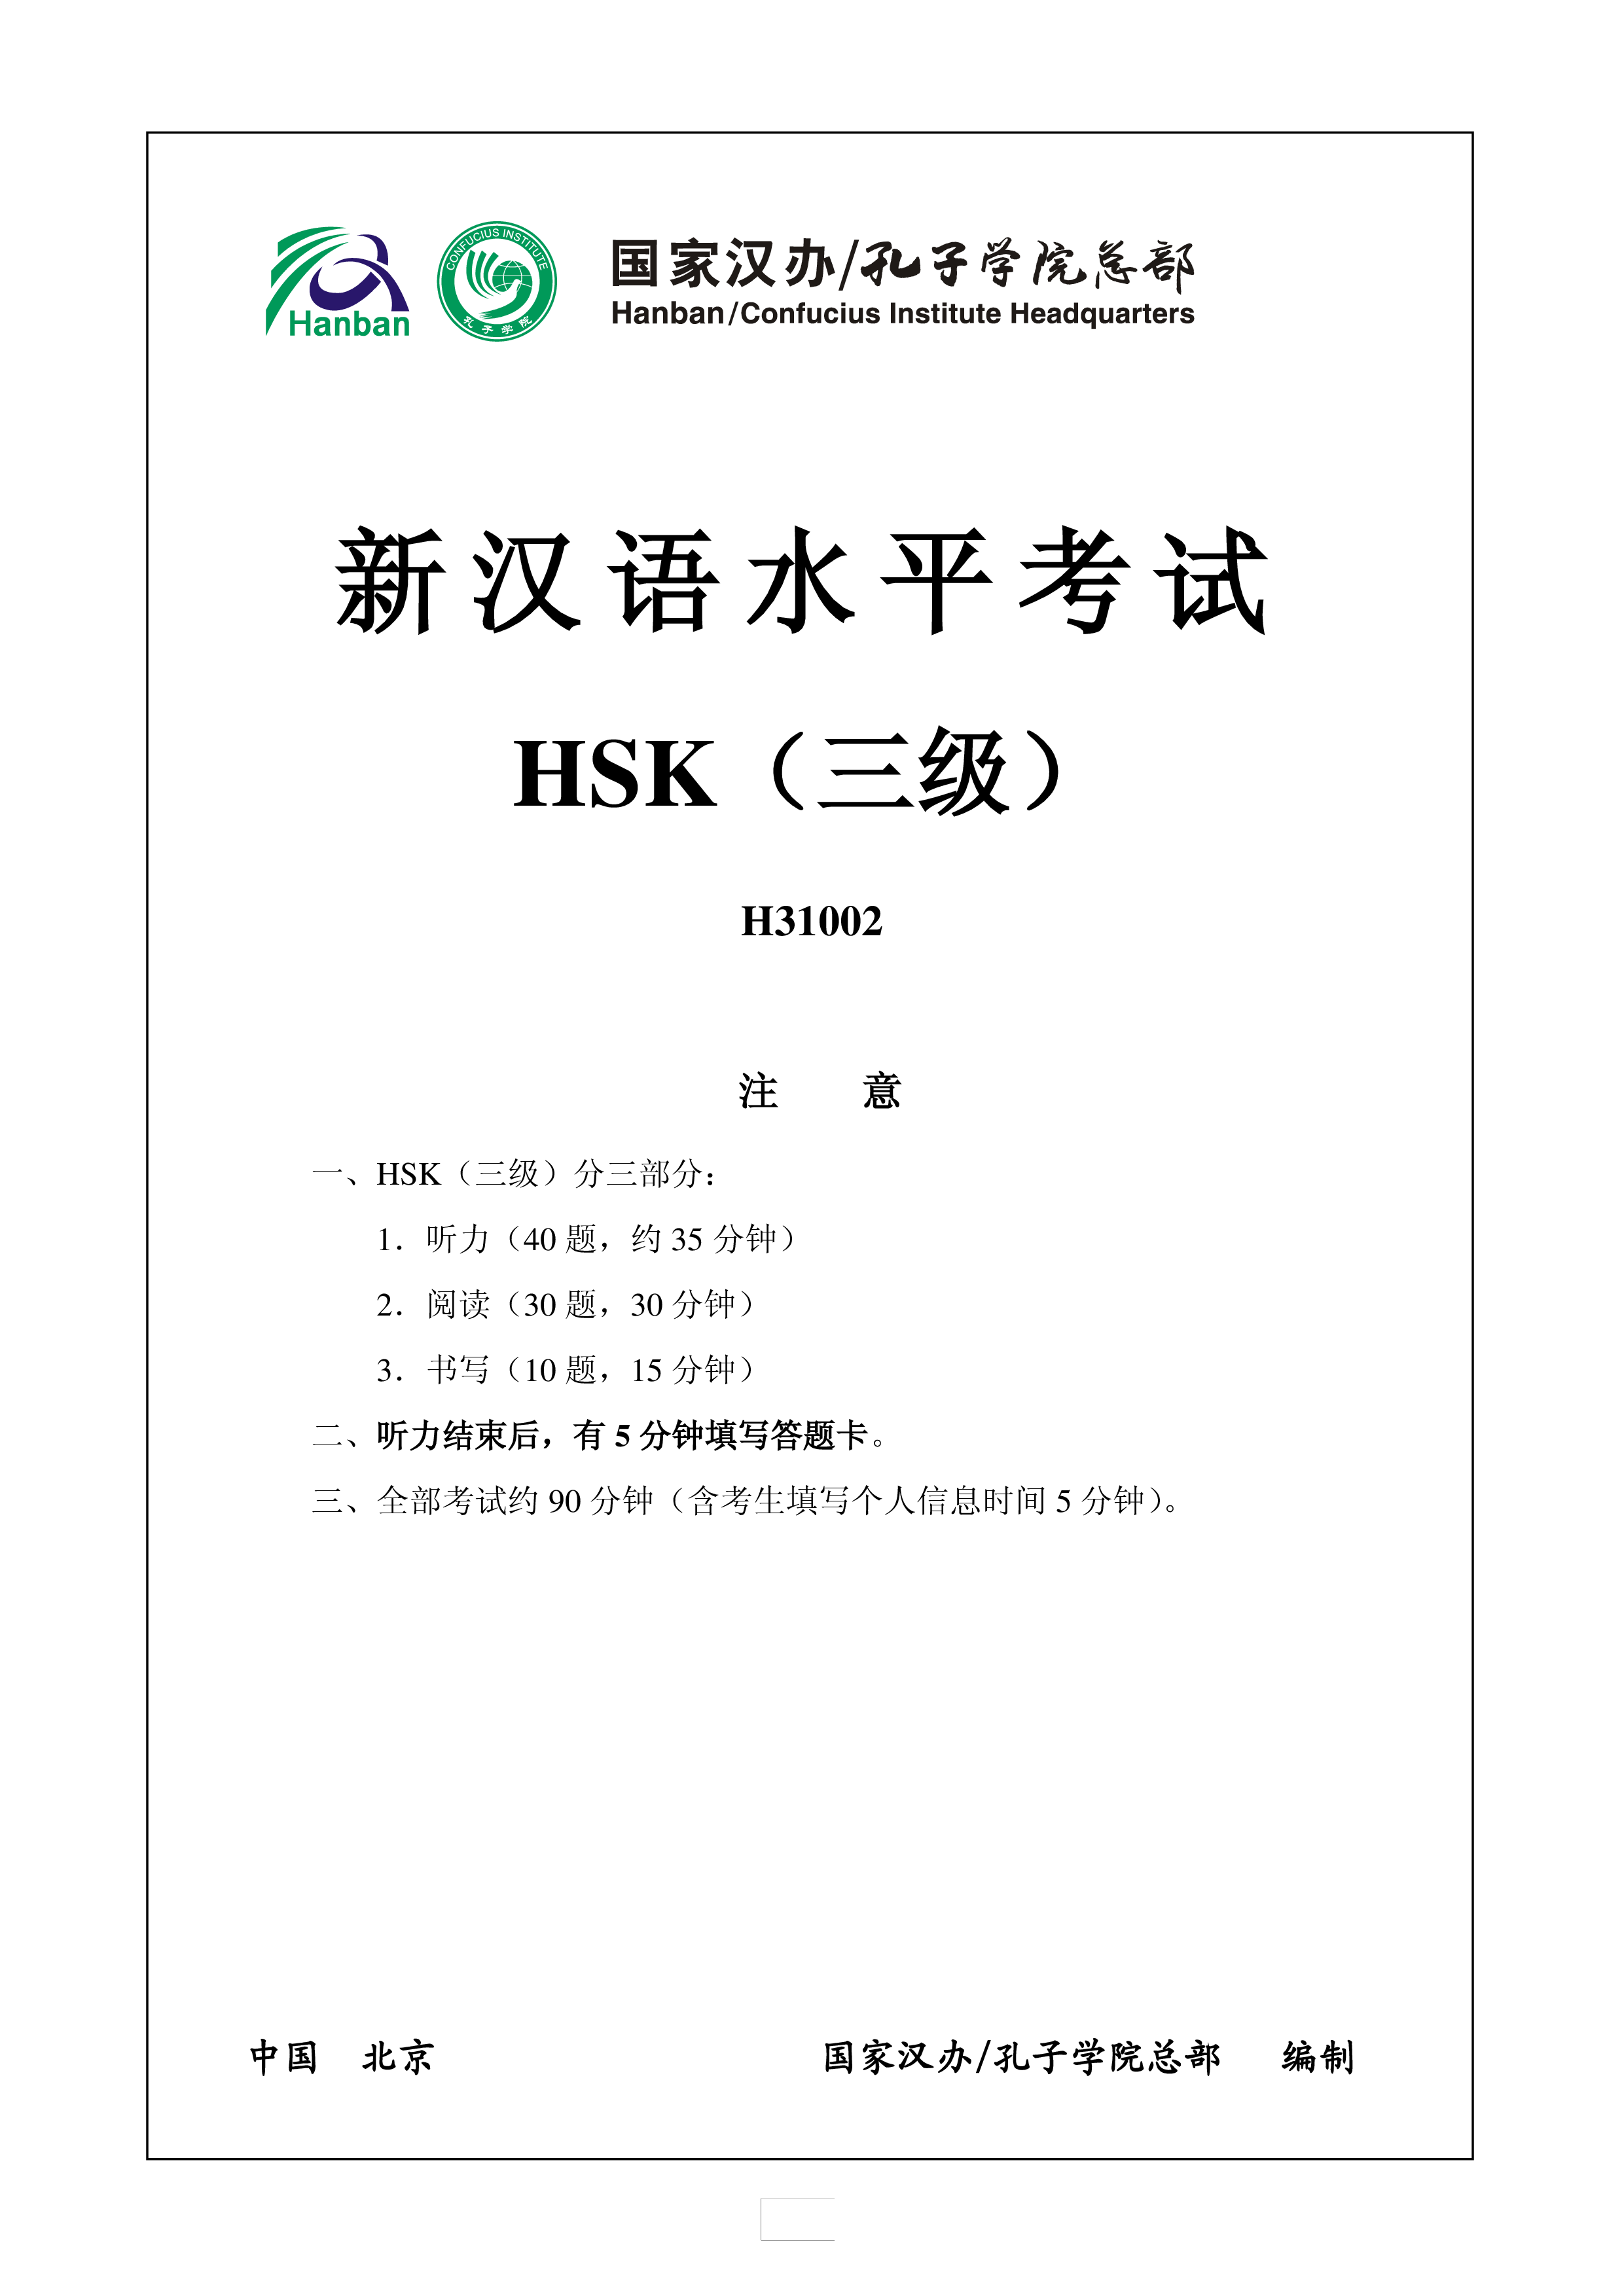 hsk3 chinese exam including answers hsk3 h31002 template